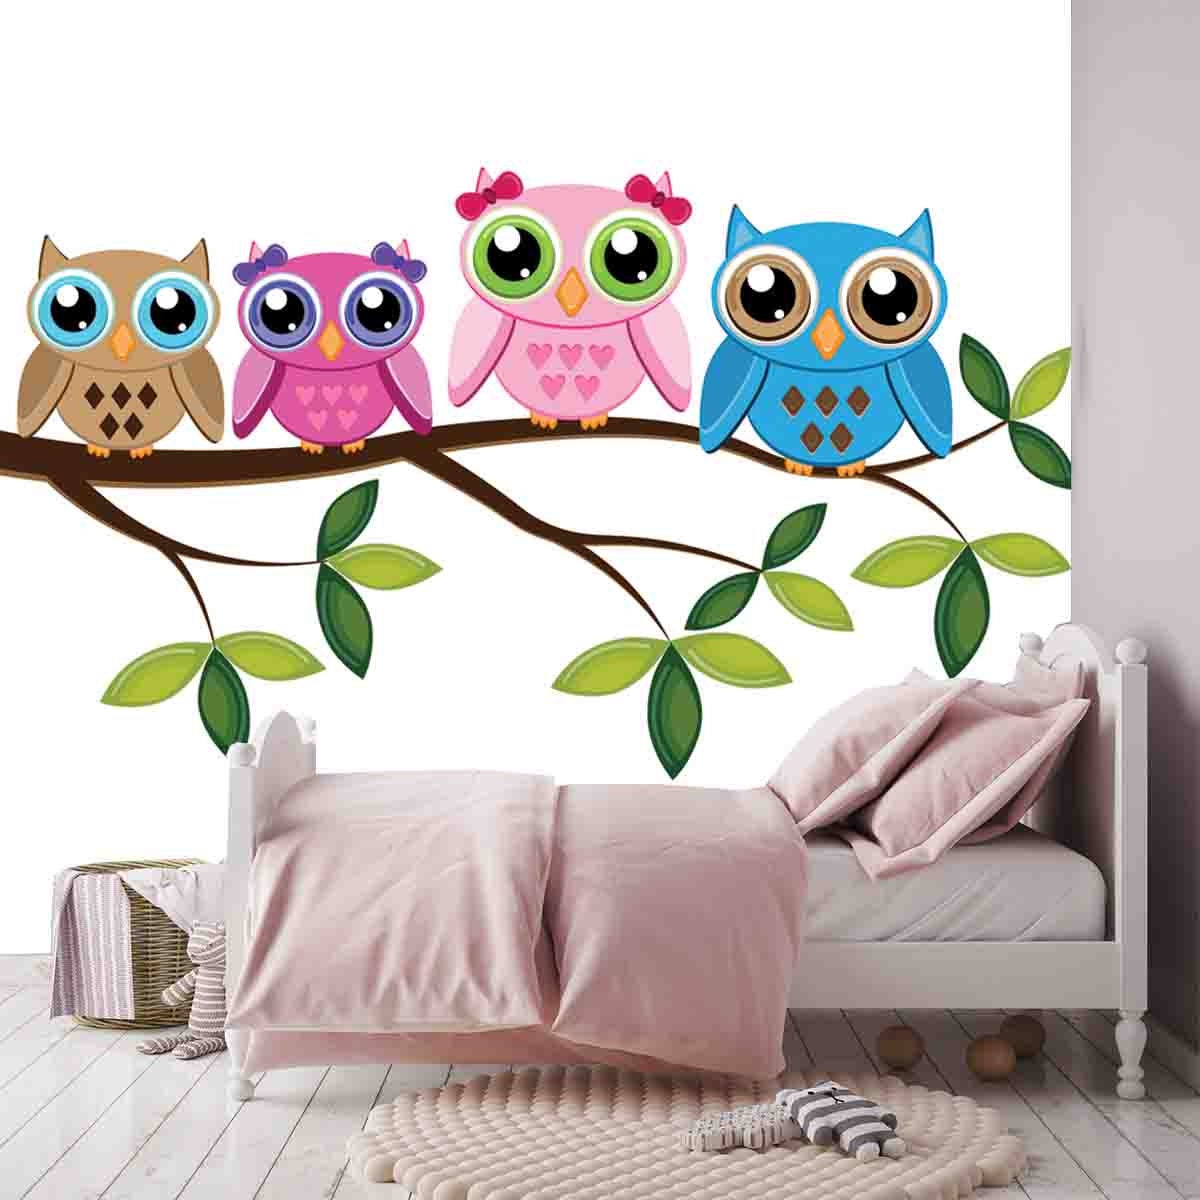 Four Colorful Owls Sitting on the Branch on a White Background Wallpaper Little Girl Bedroom Mural